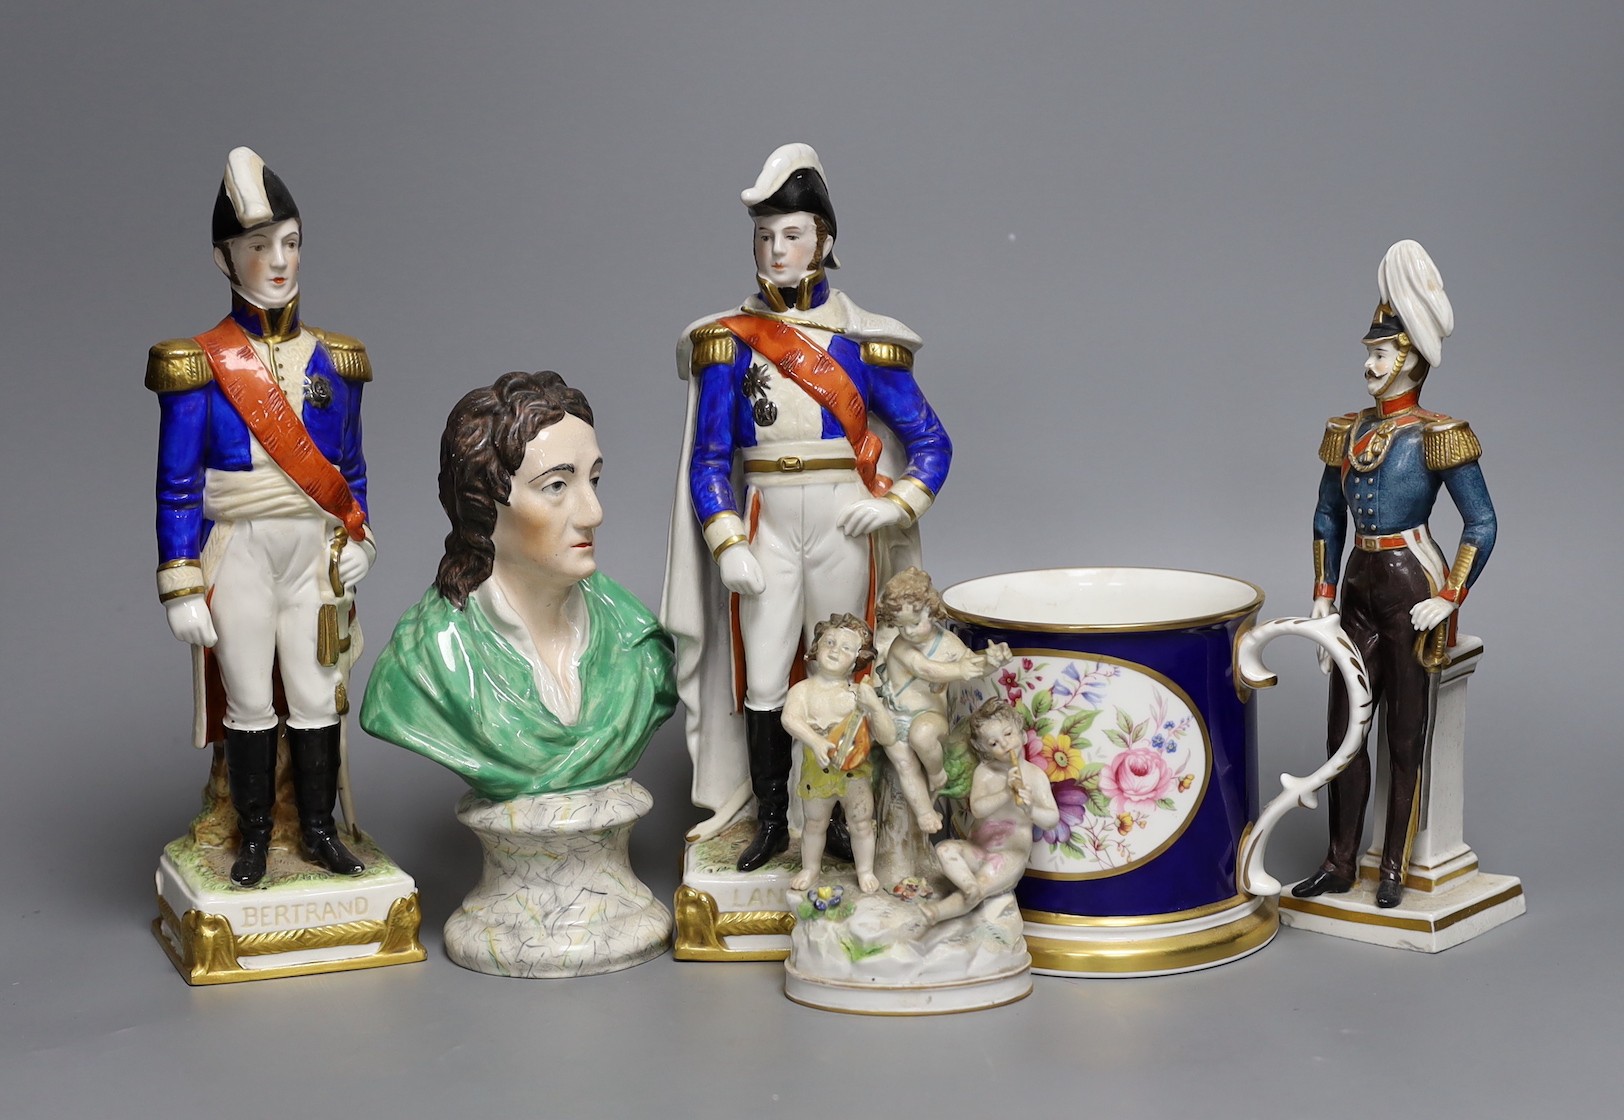 A Staffordshire bust inscribed Locke and three military figures, a two handled tankard and a cherub group, bust 19cms high